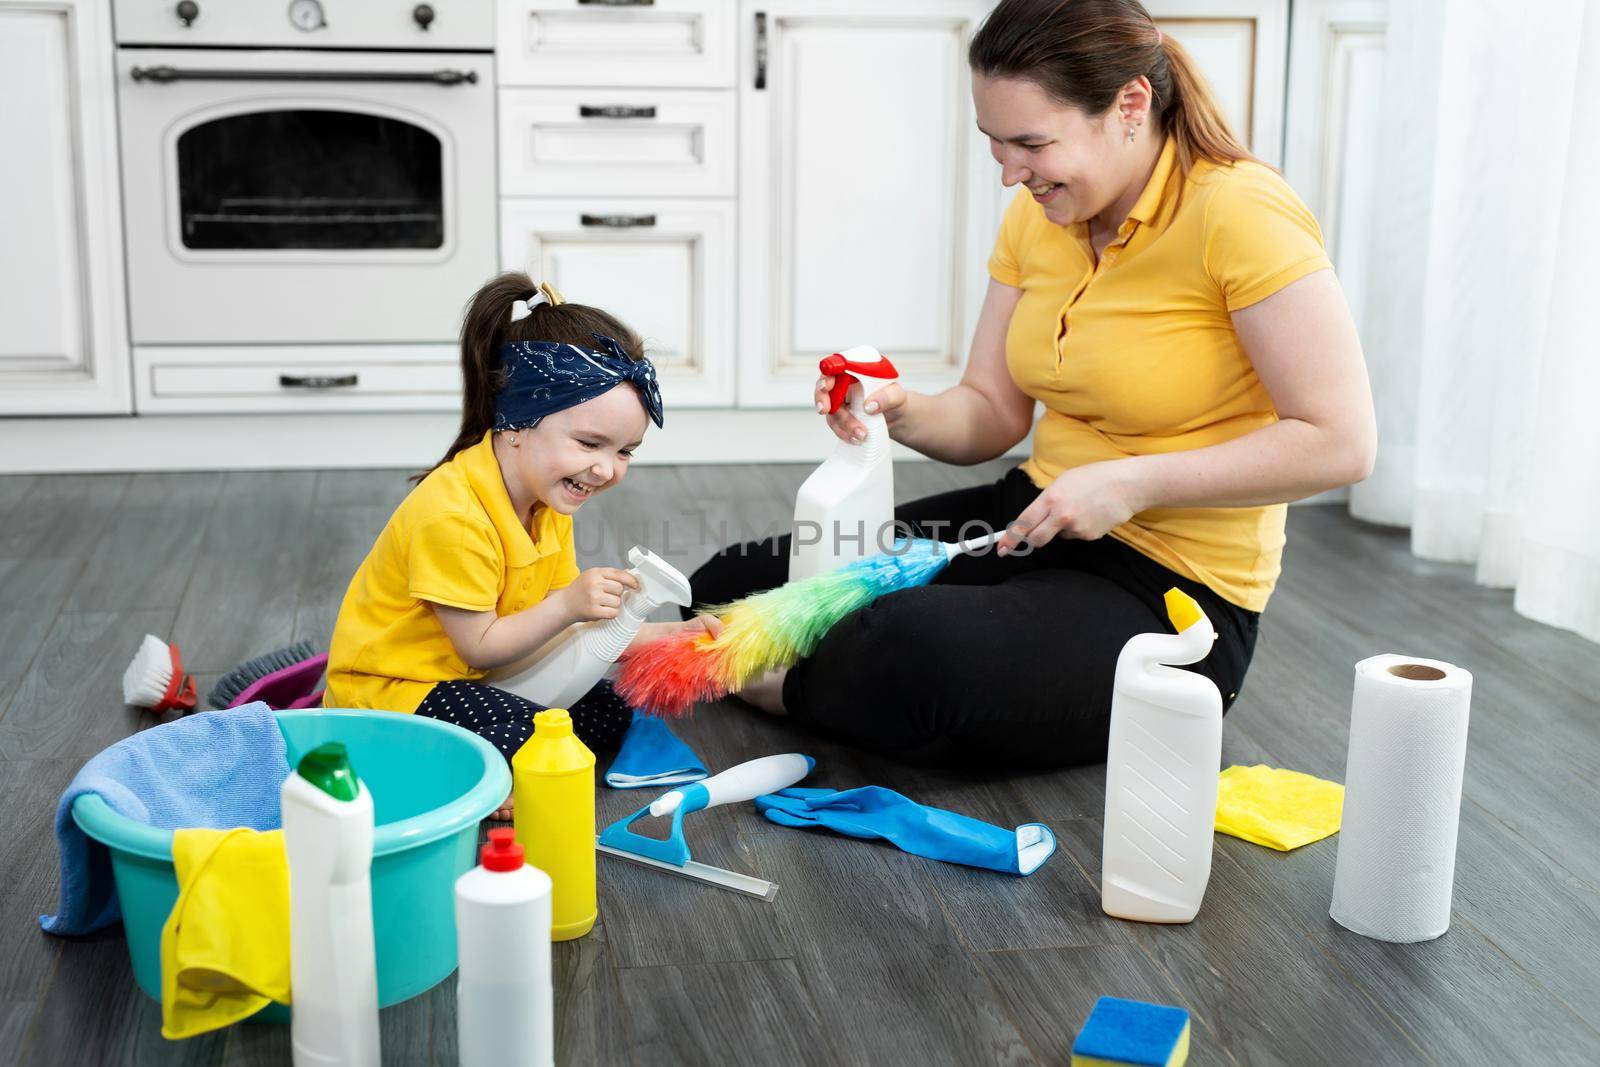 Mom and daughter are ready to clean the apartment, spraying detergent from the spray gun.